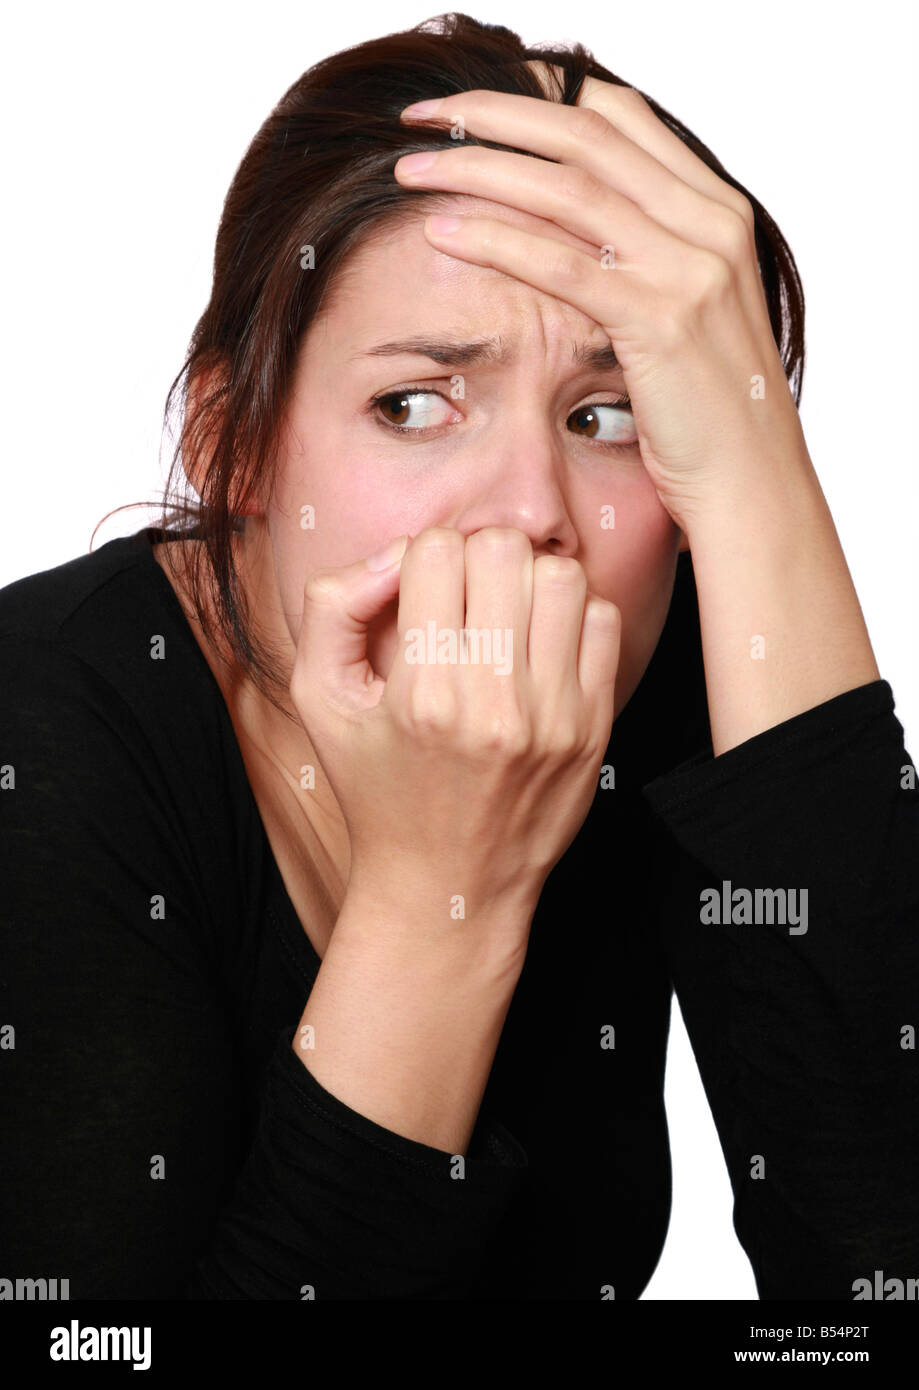 woman looking frightened Stock Photo